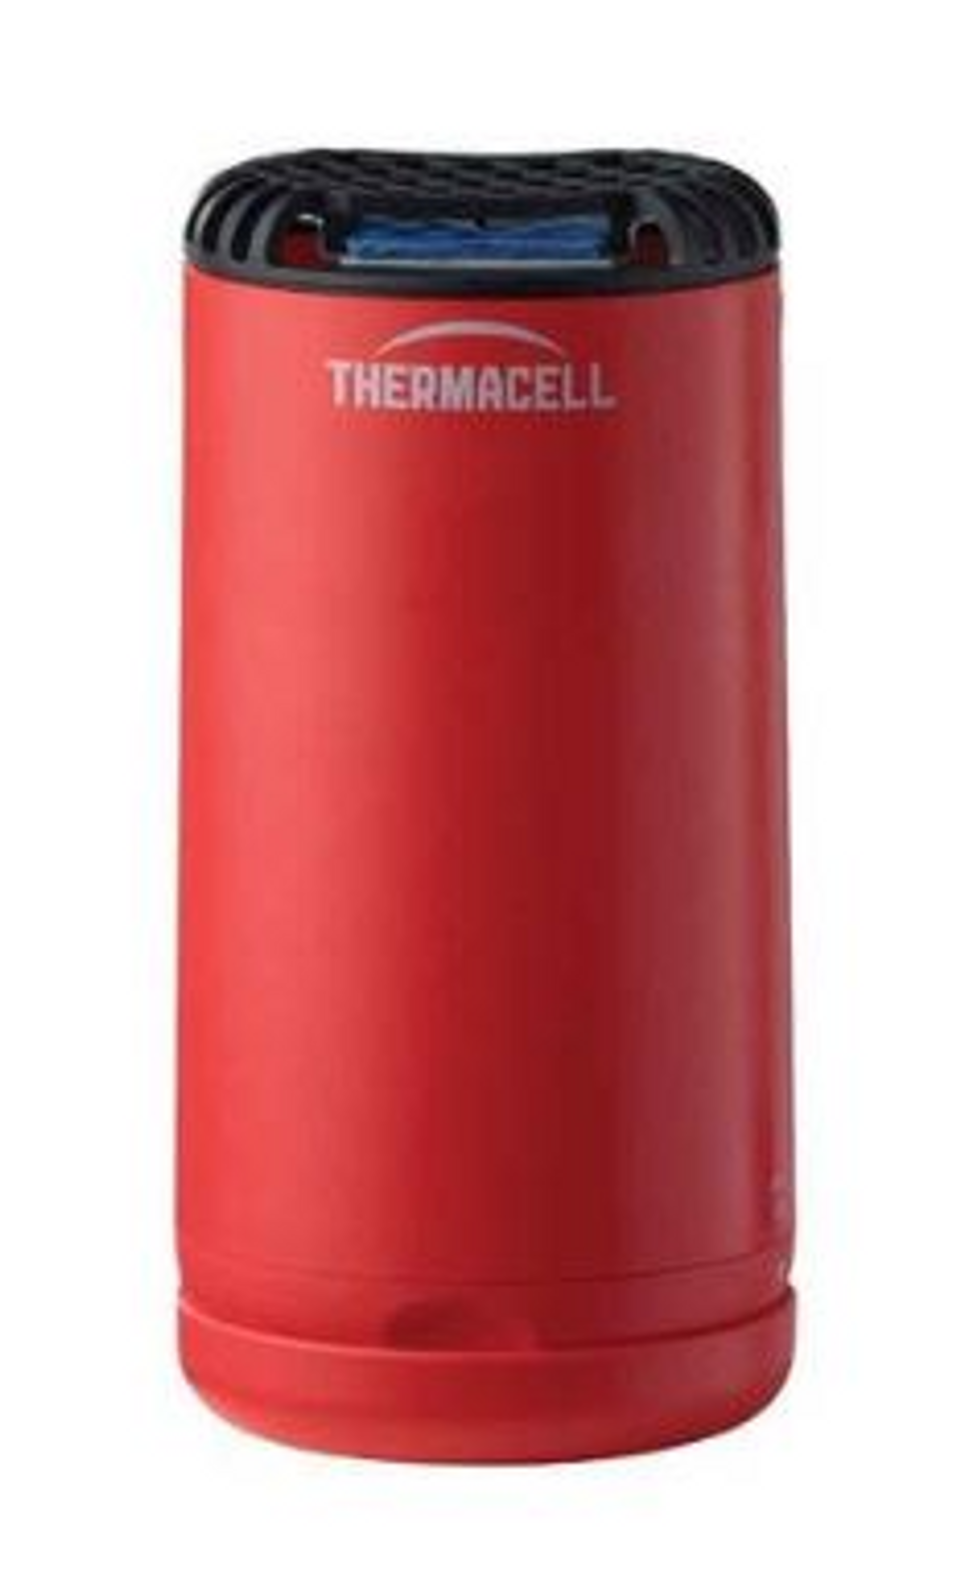 Thermacell Patio Shield Mosquito Repeller - Fiesta Red Thermacell  UPC: 843654001395